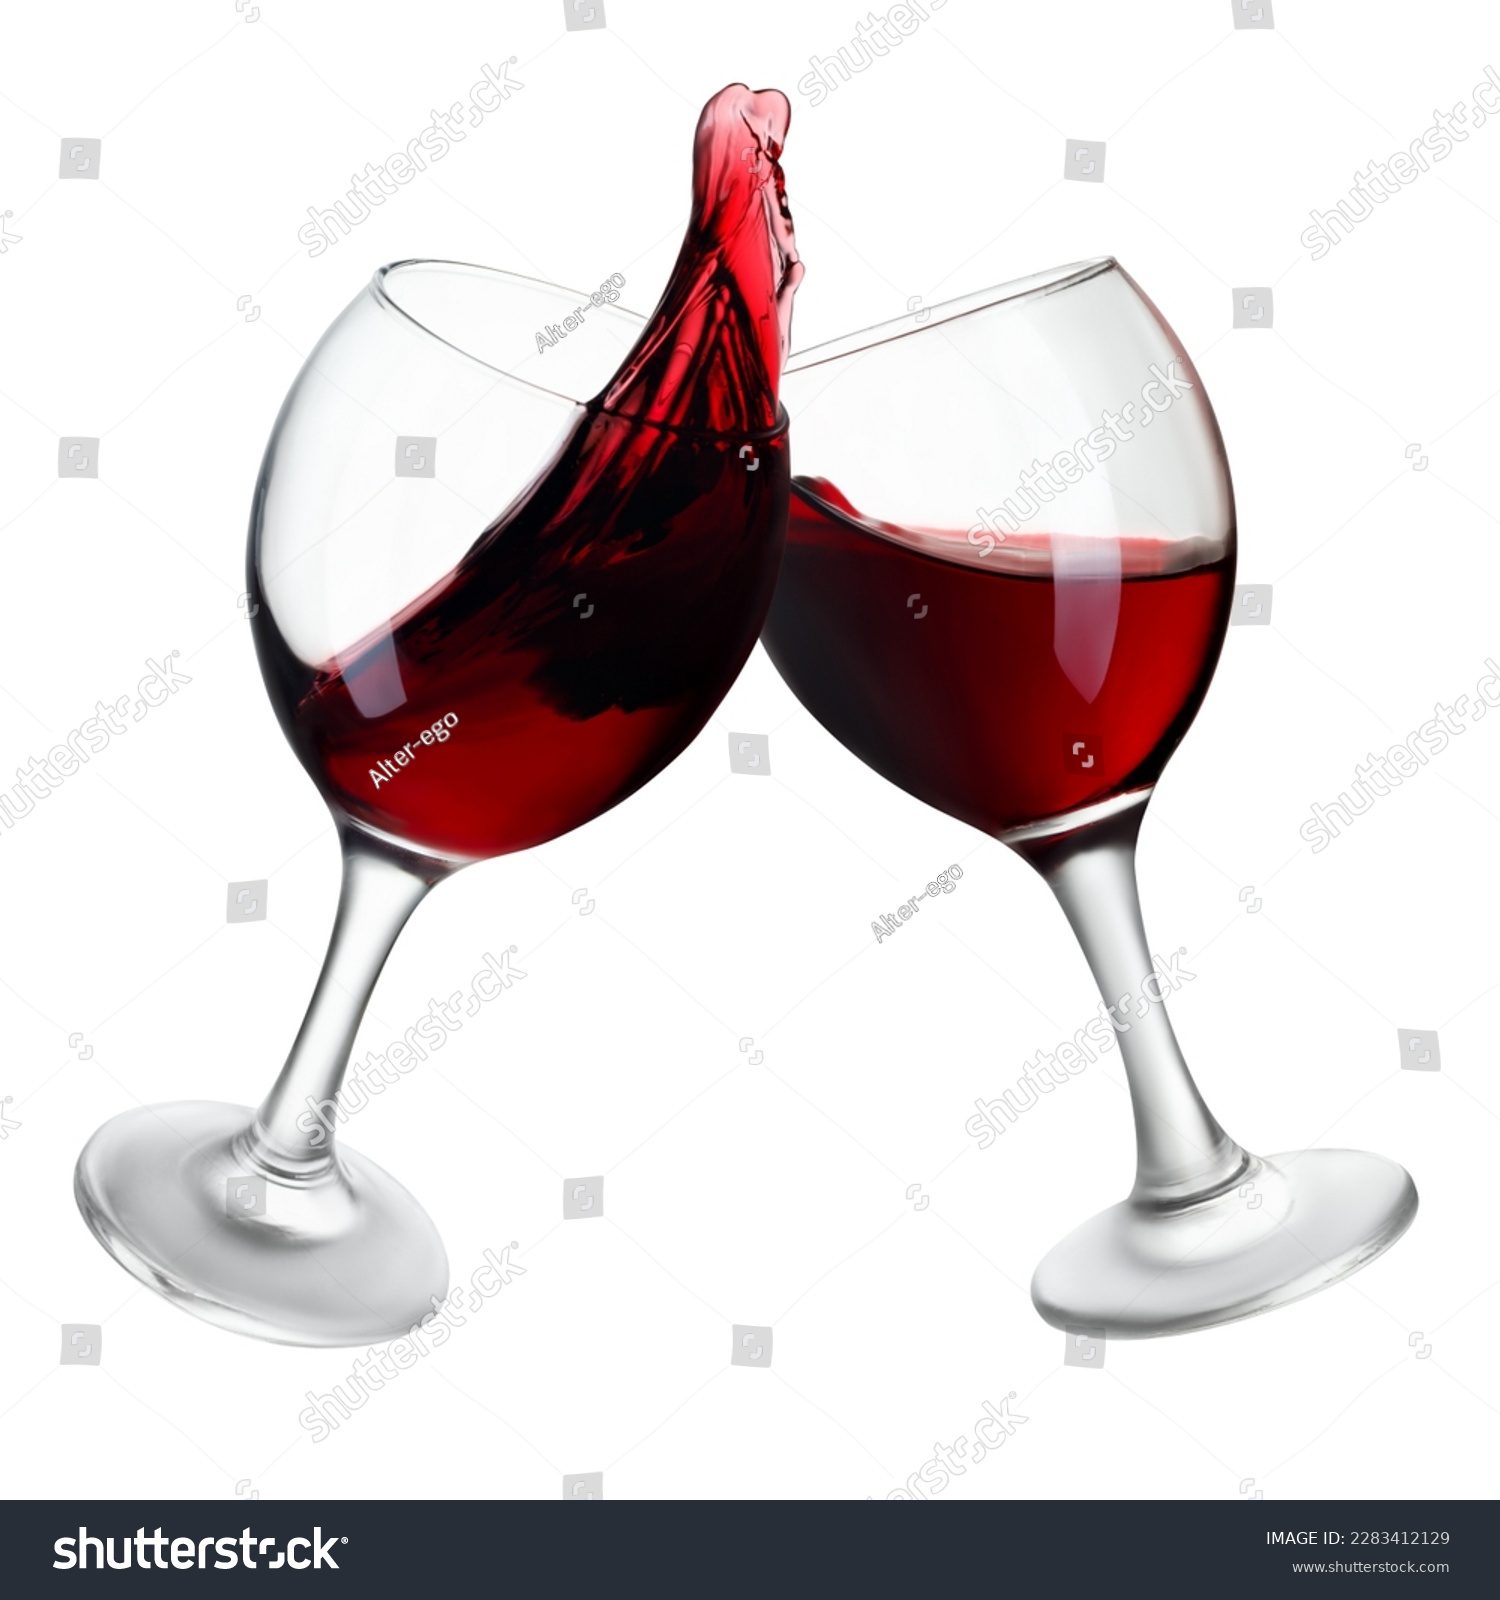 two glasses of red wine making toast with splash isolated on white background #2283412129